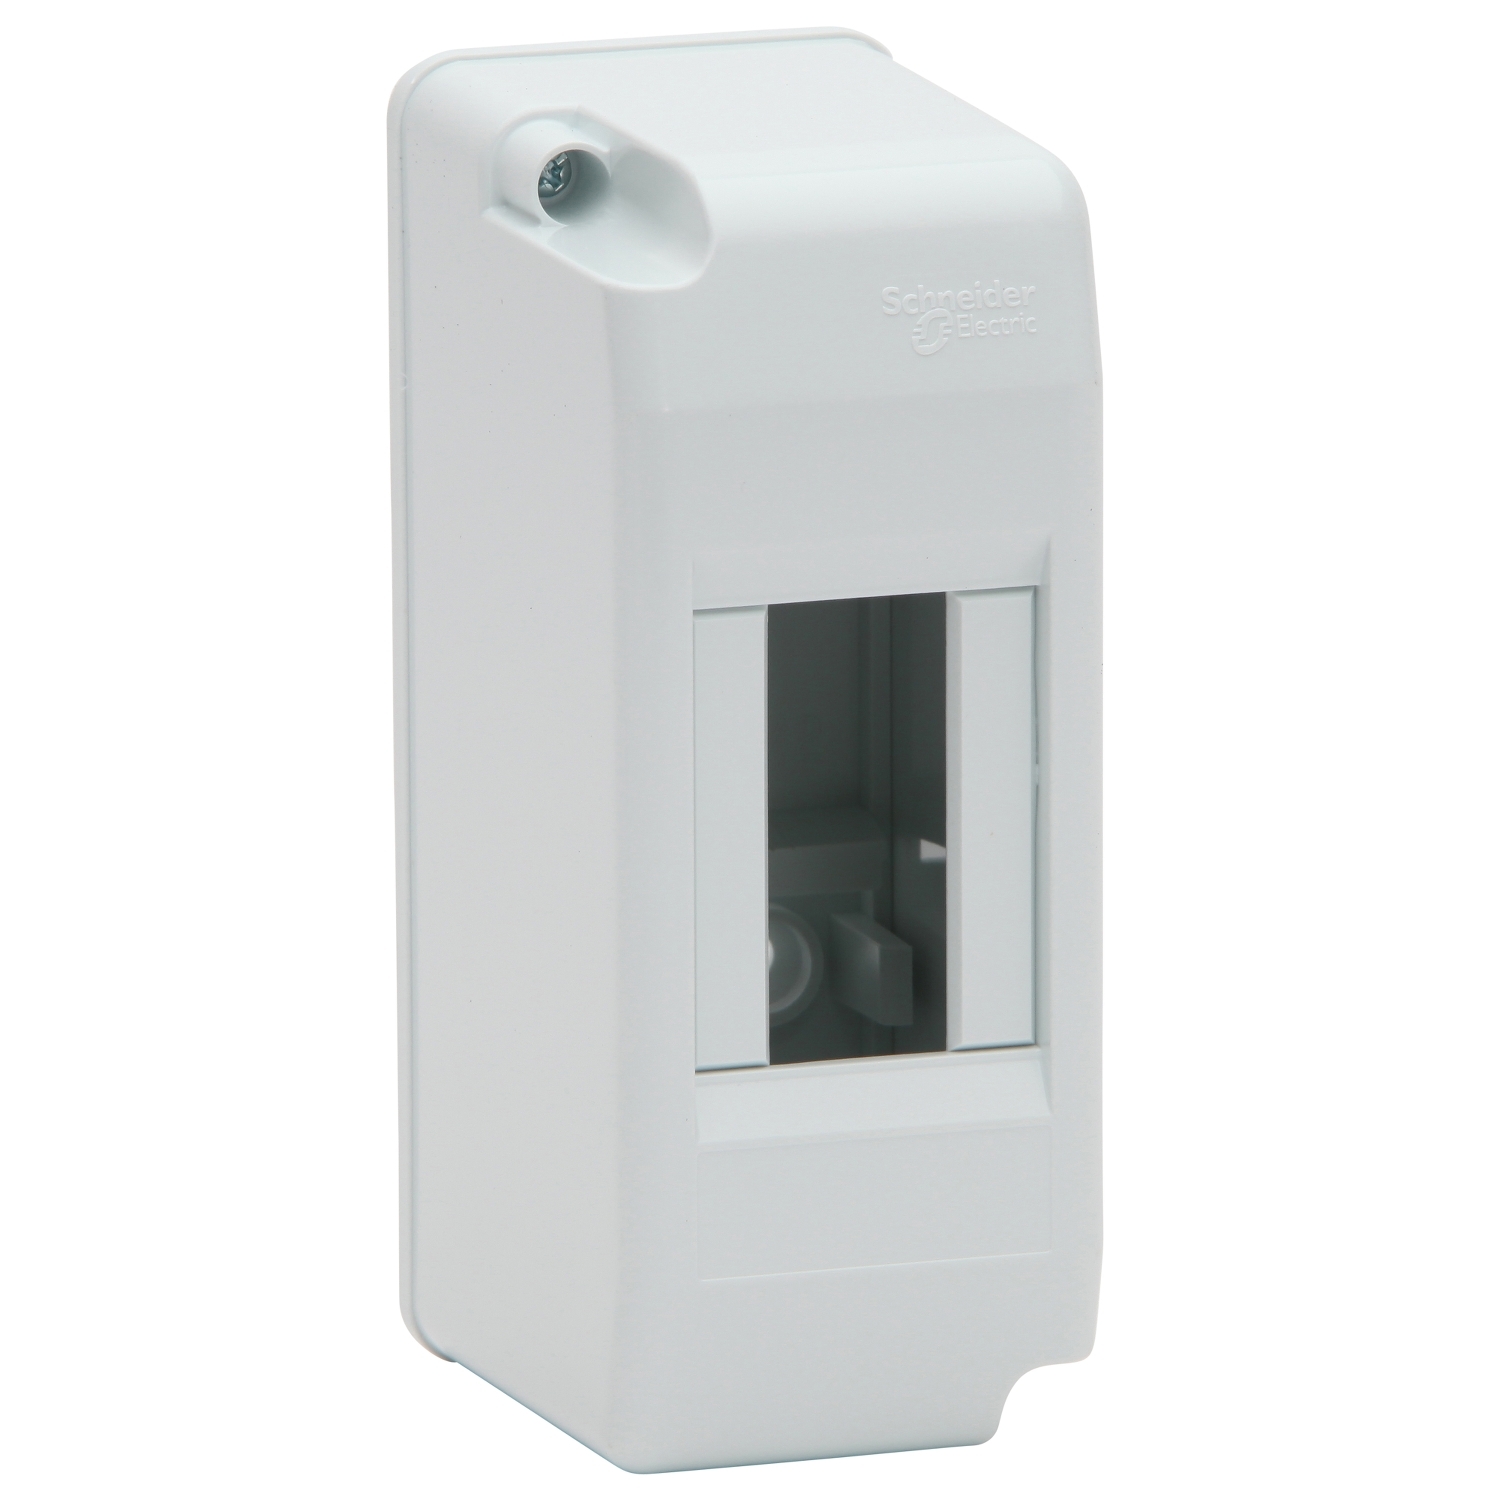 PDL  2-Way x 1 Surface Enclosure; 1-Pole and 1/2-Pole Knockouts Opening, ABS, White